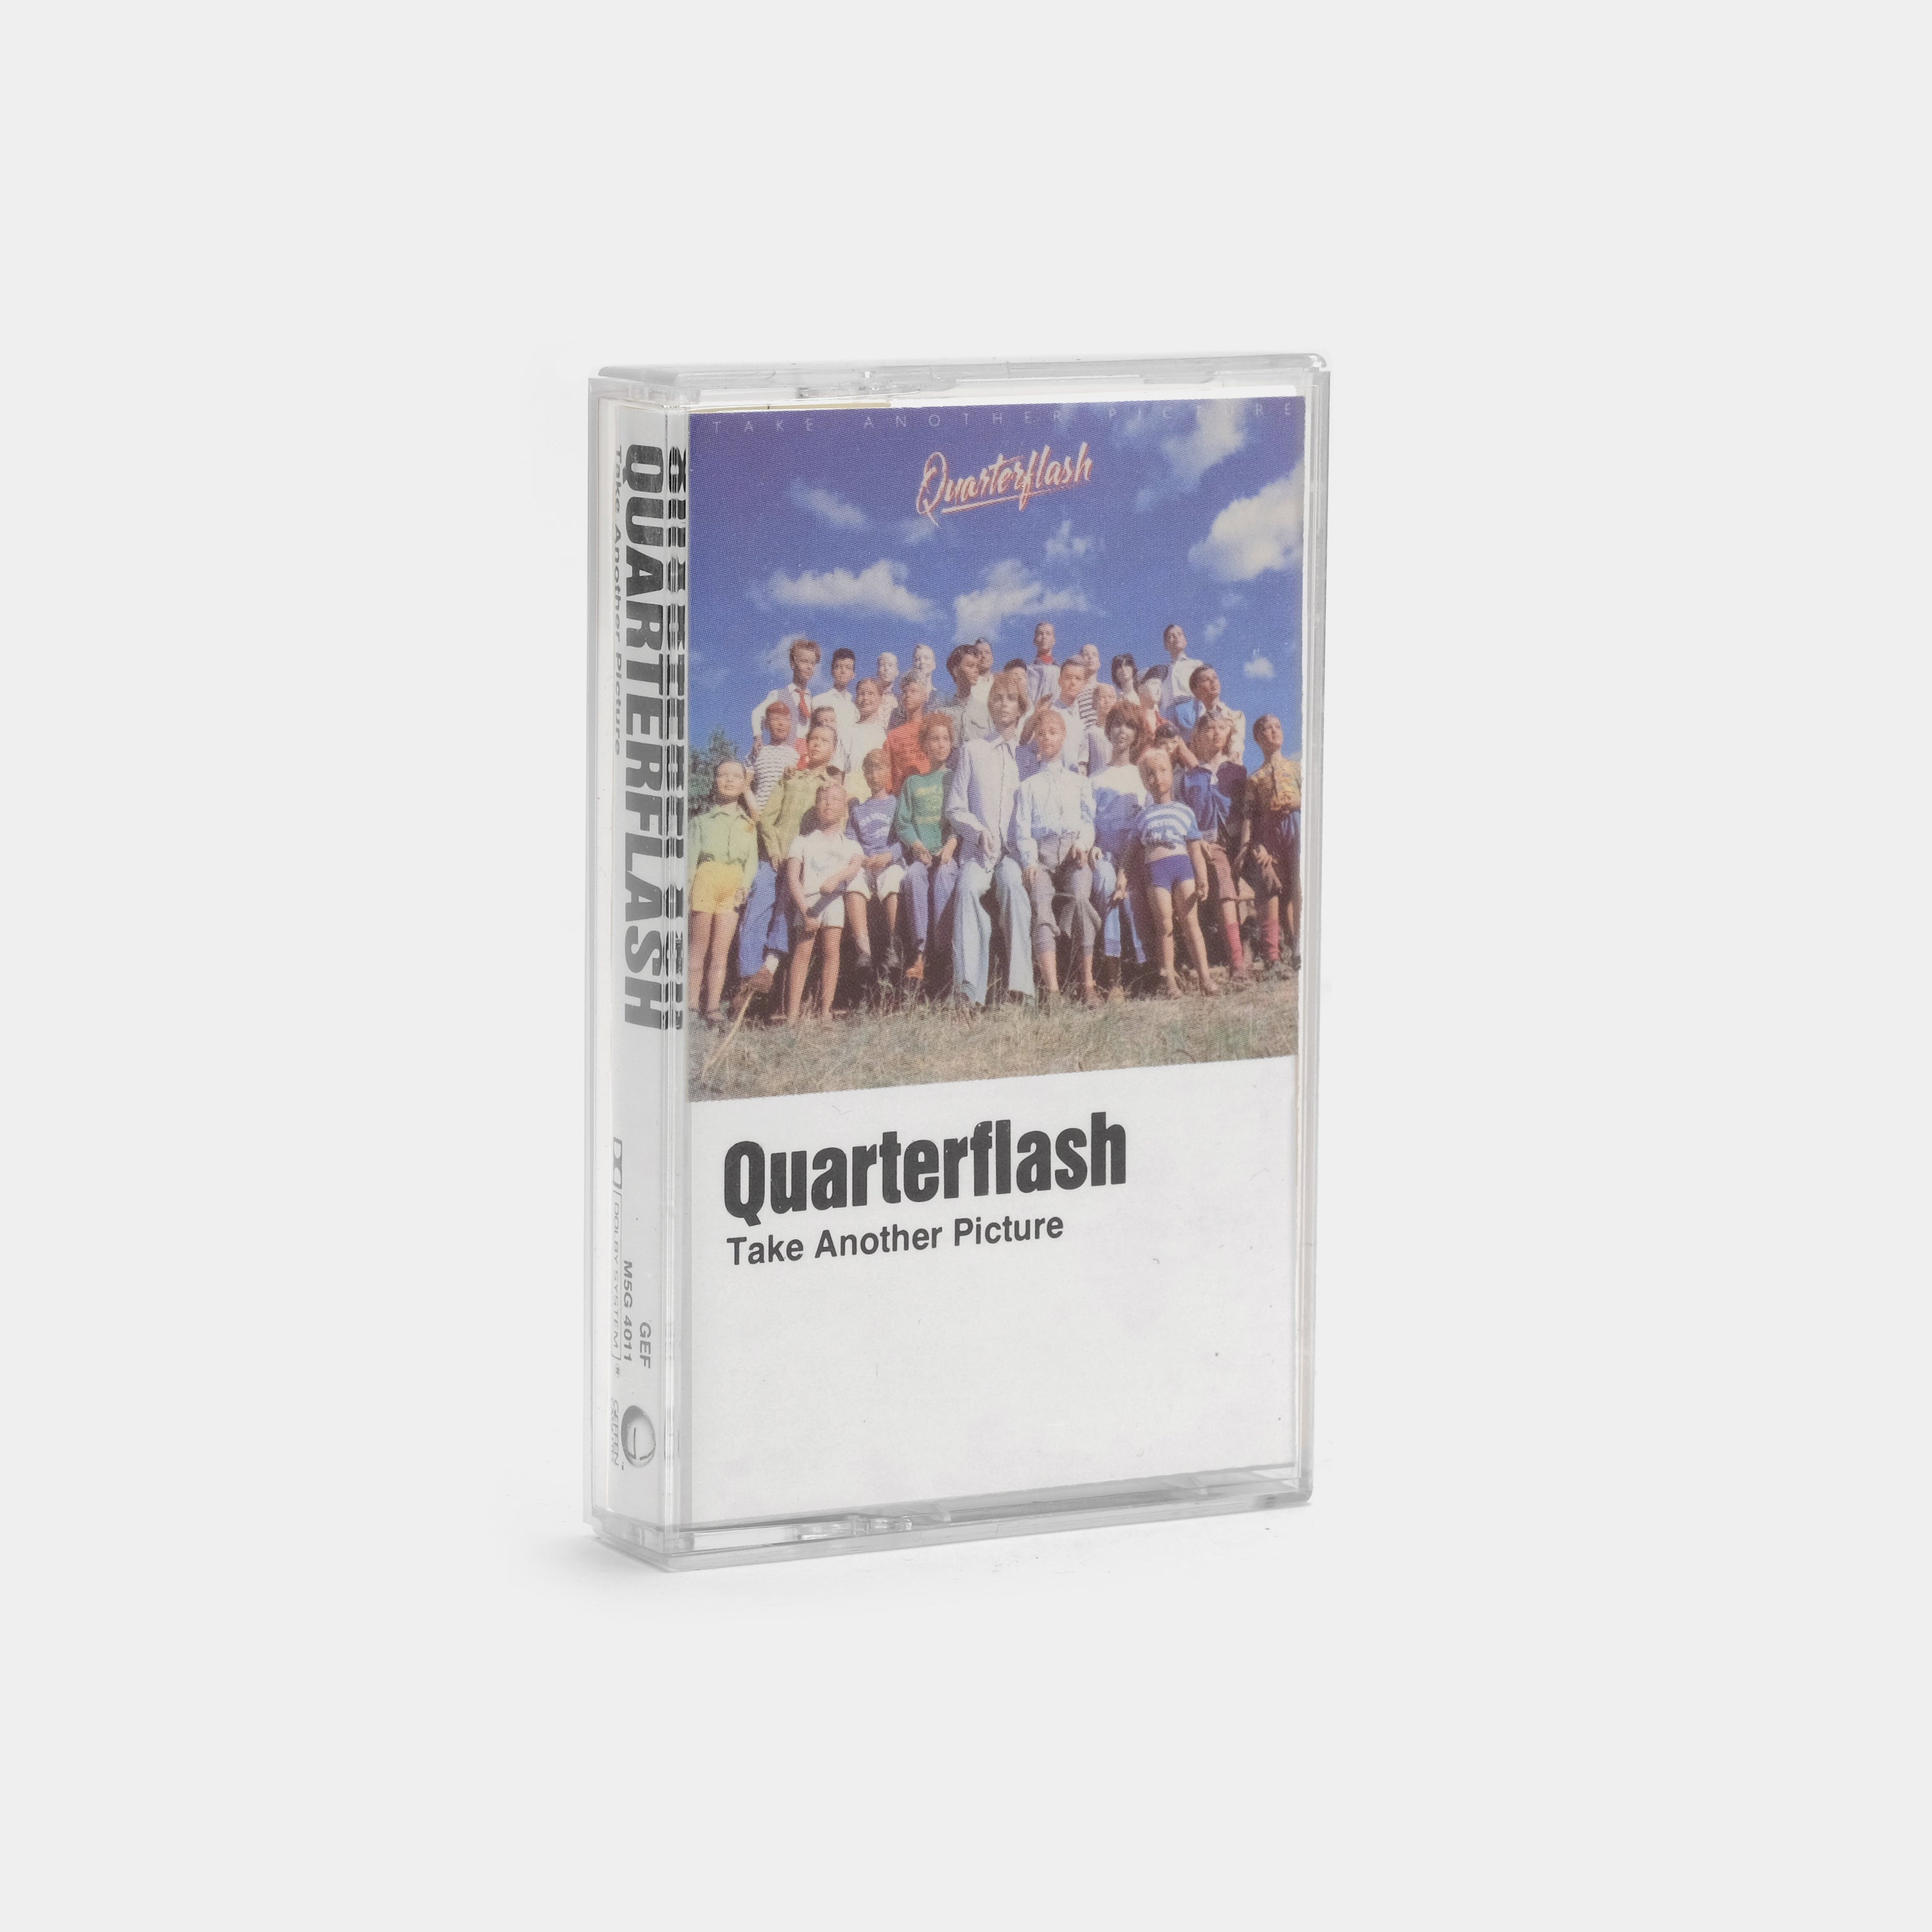 Quarterflash - Take Another Picture Cassette Tape